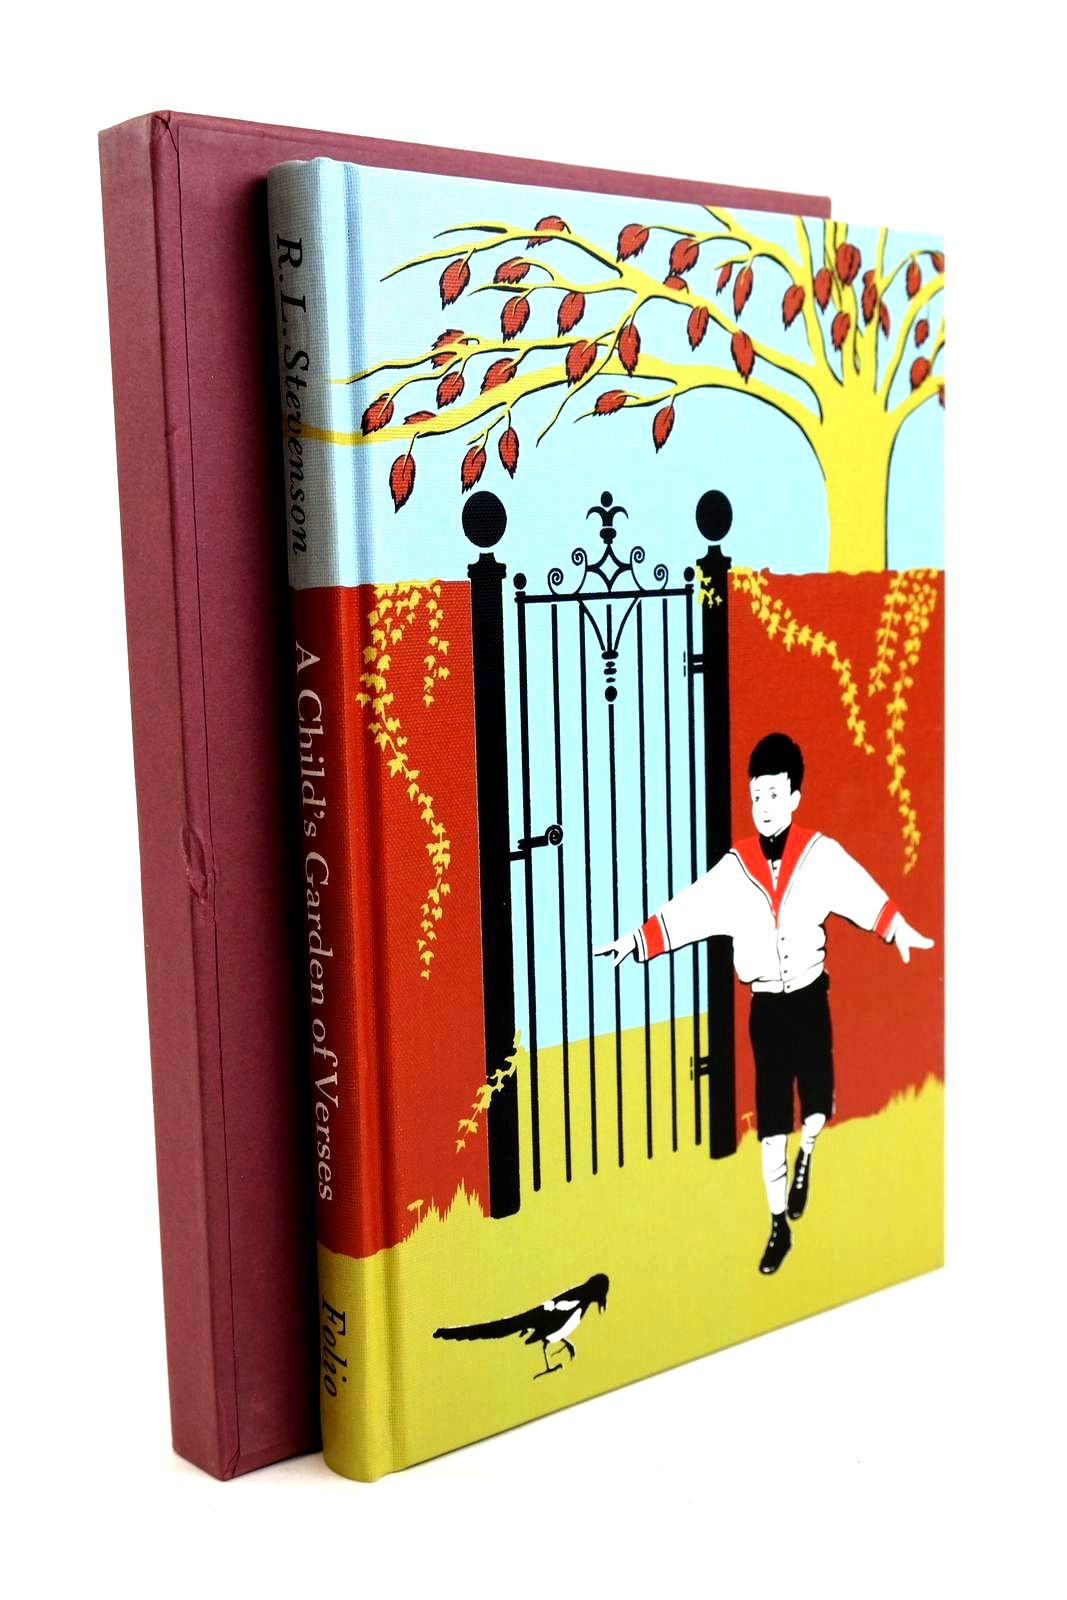 Photo of A CHILD'S GARDEN OF VERSES written by Stevenson, Robert Louis illustrated by Smithson, Helen published by Folio Society (STOCK CODE: 1320240)  for sale by Stella & Rose's Books